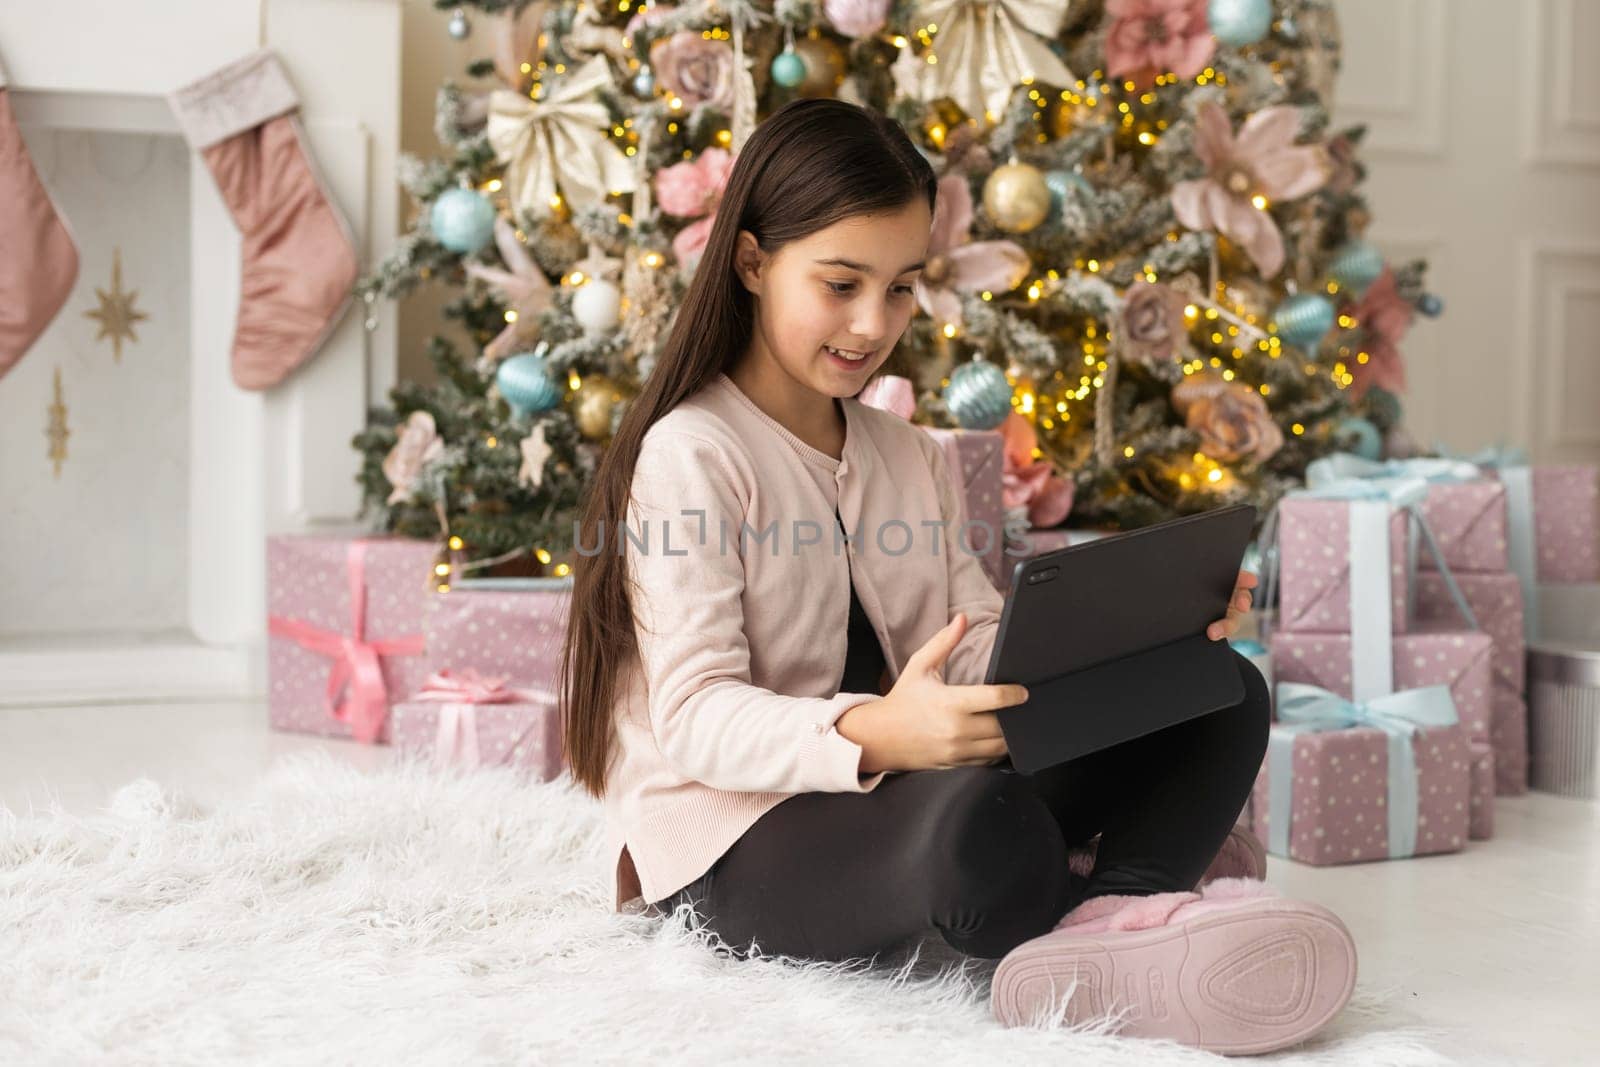 Cute girl using computer by christmas tree by Andelov13